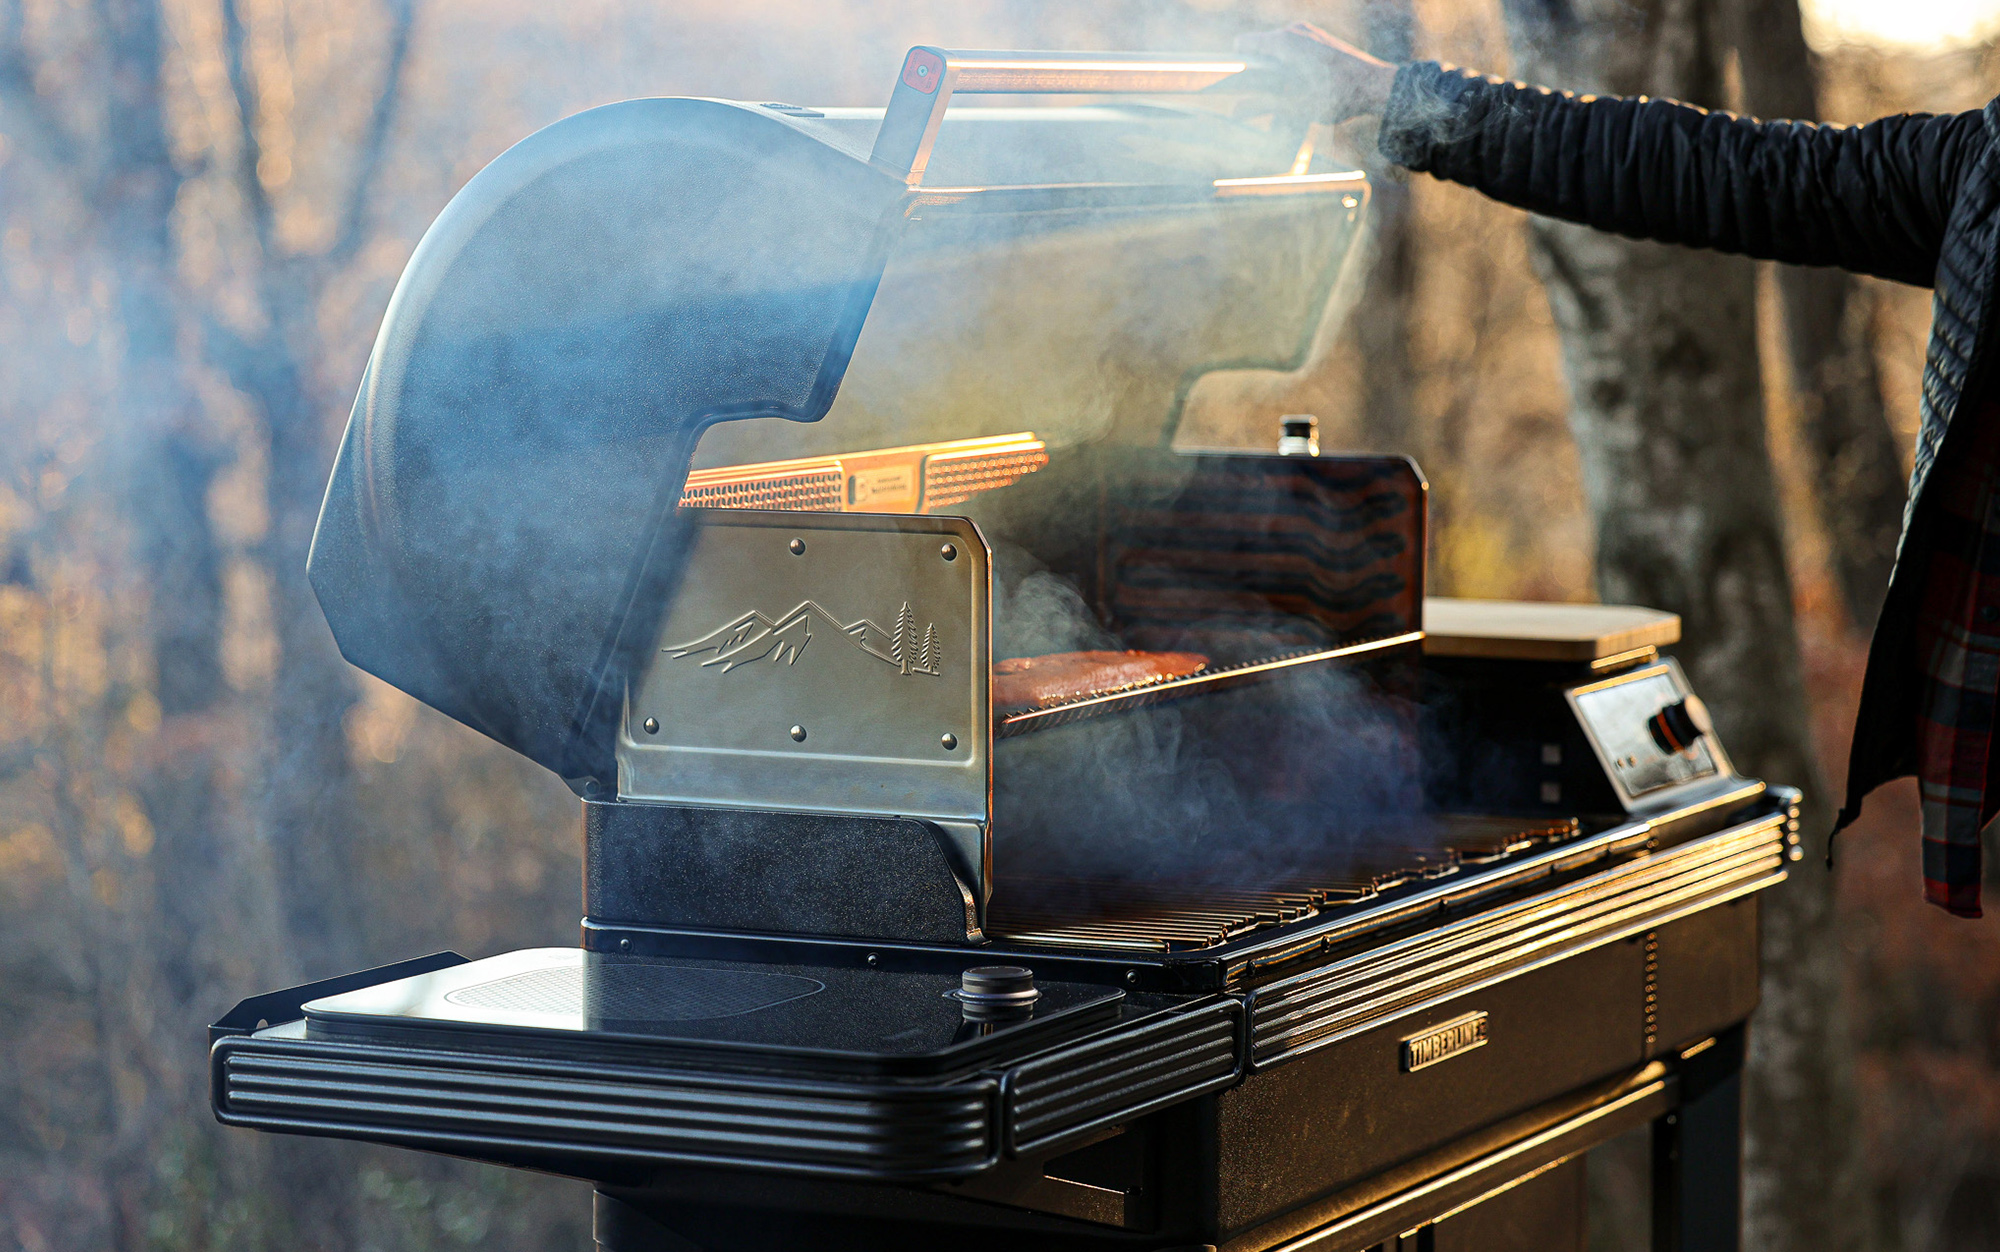 Traeger's Super Smoke mode allows you to impart even more rich smoke flavor into your meat.